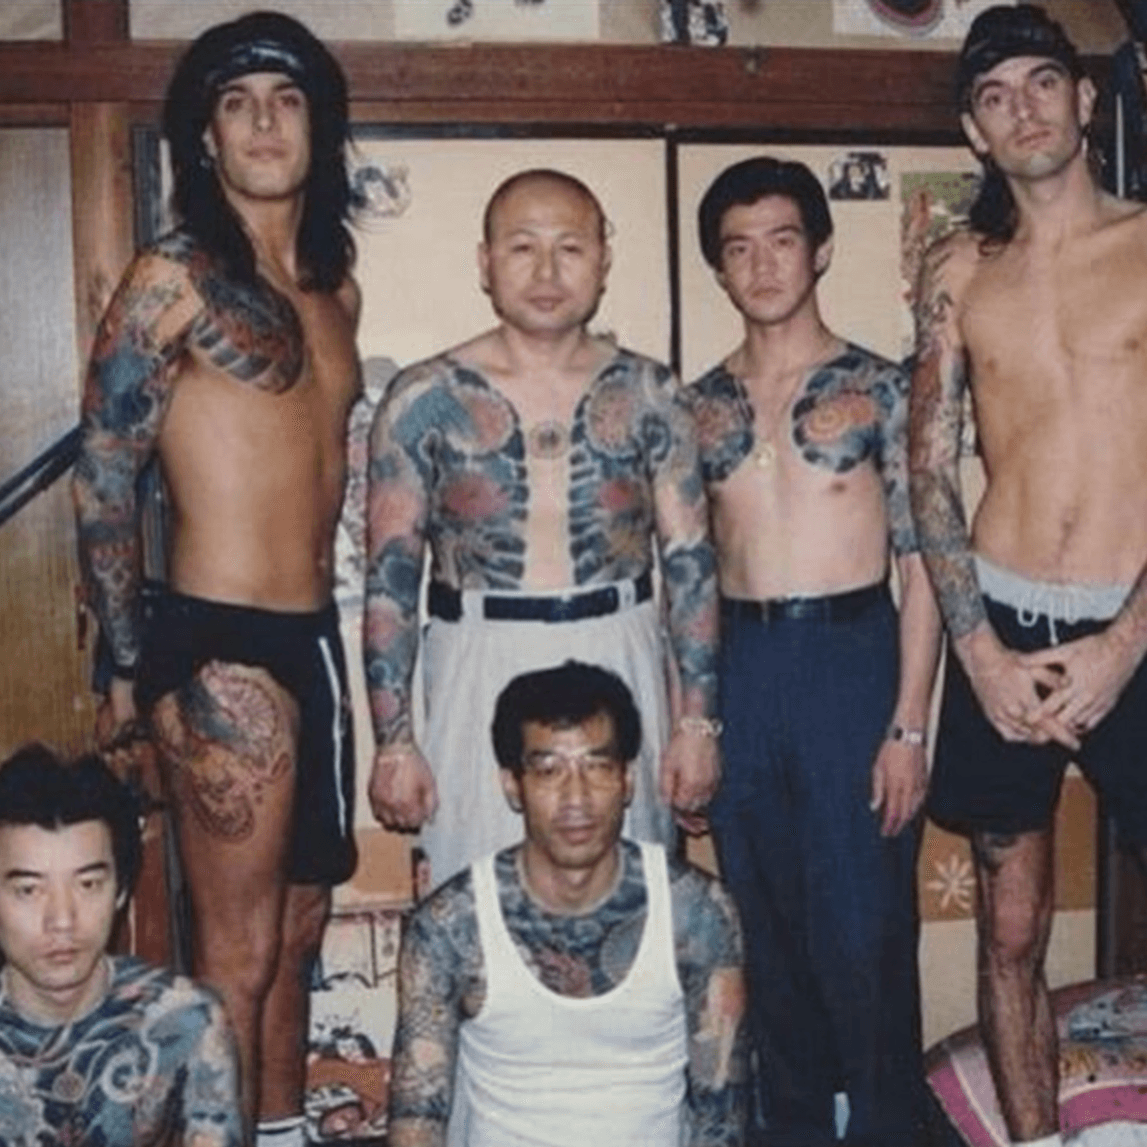 8 Most Hideous Rock Star Tattoos The Internet Could Provide  Vintage Heavy  Metal